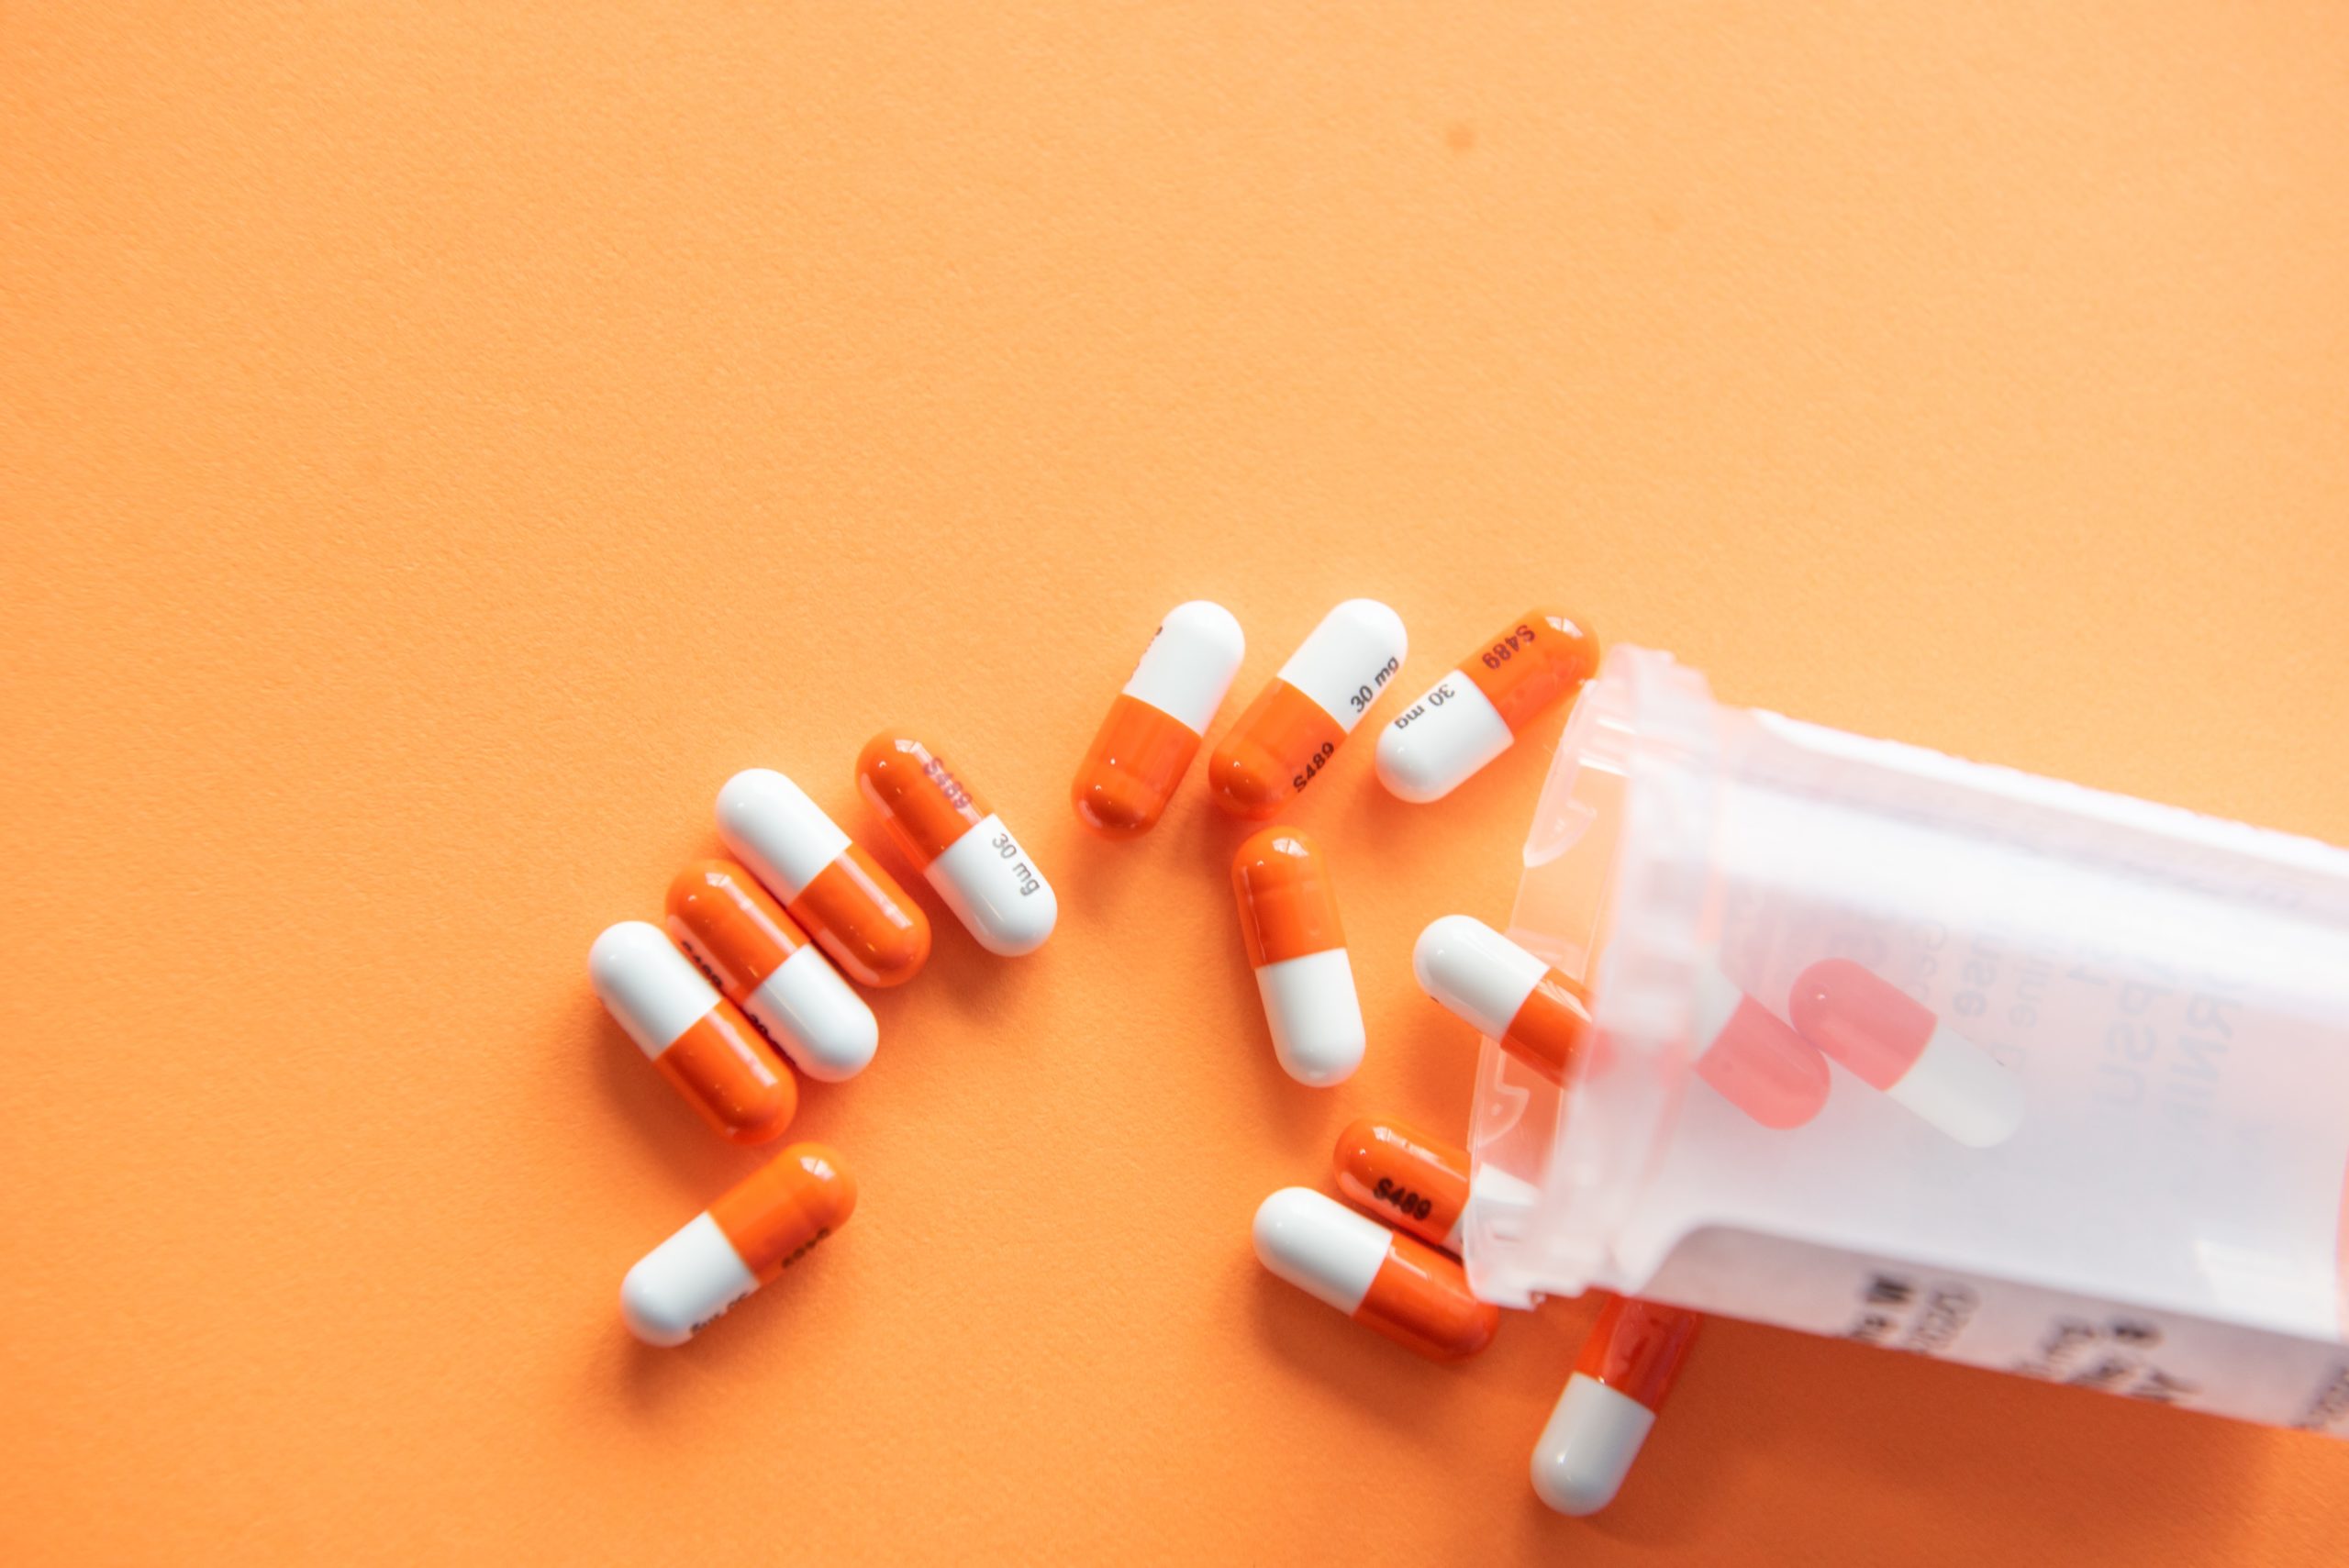 Does Adhd Medication Help With Anxiety? ADHD Medications For Adults With Anxiety: Since stimulant medications may exacerbate anxiety symptoms, non-stimulants are a better choice for those who have both ADHD and anxiety.